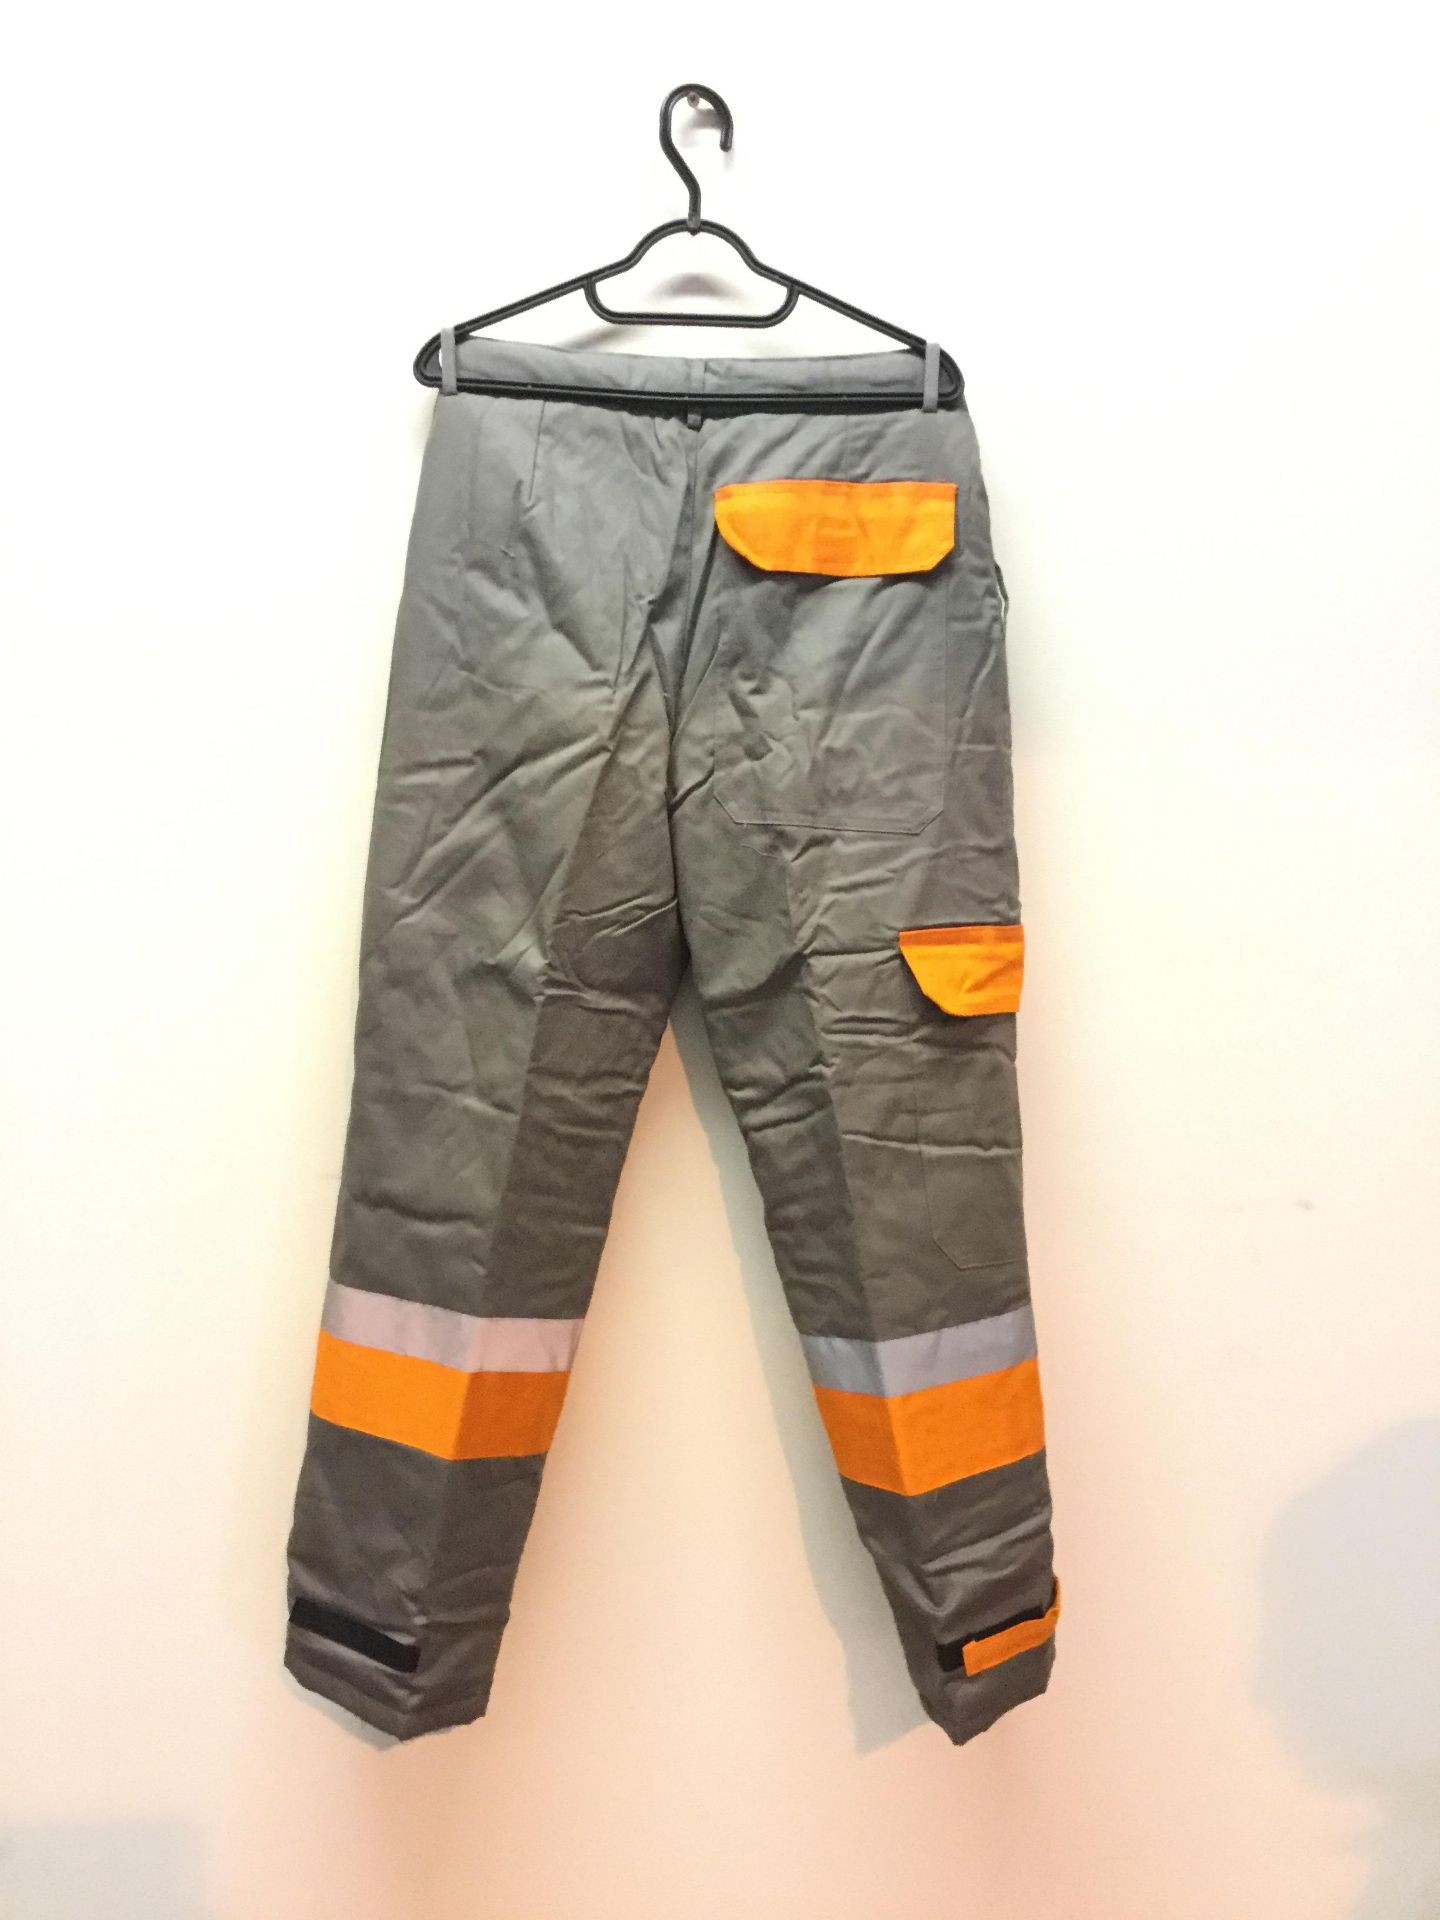 Flame Retardant Winter Trousers - Size 54 - Image 2 of 2